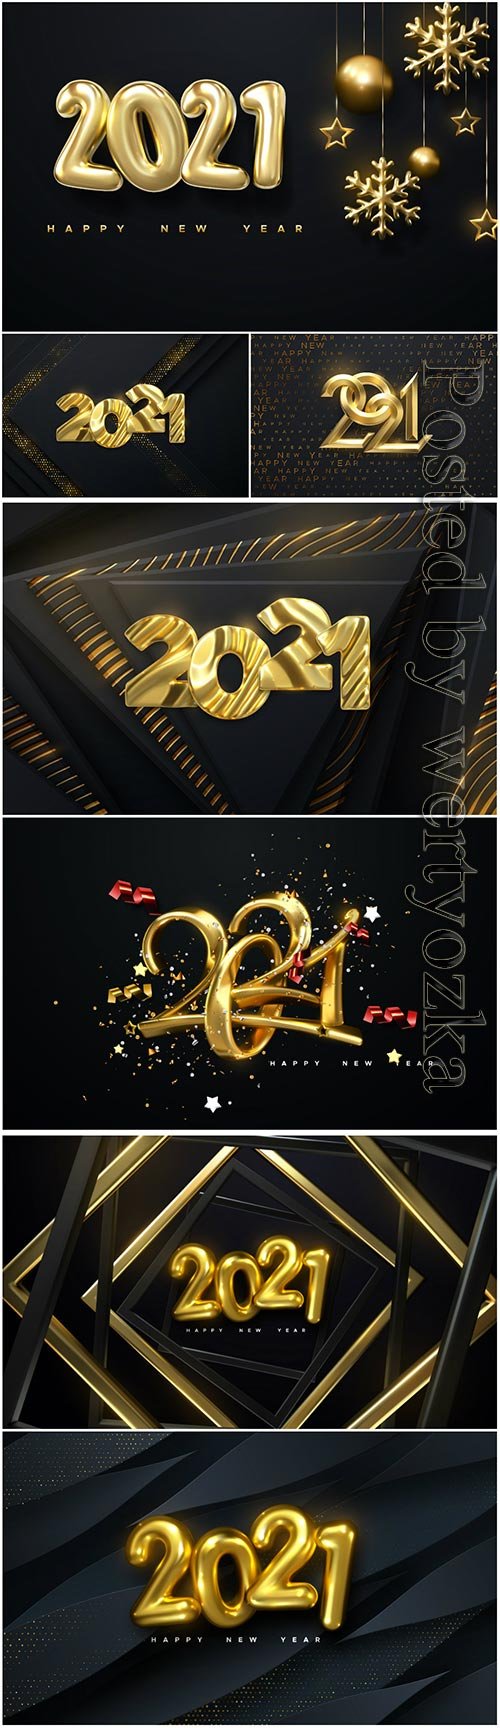 Happy new 2021 year, golden numbers on black background textured